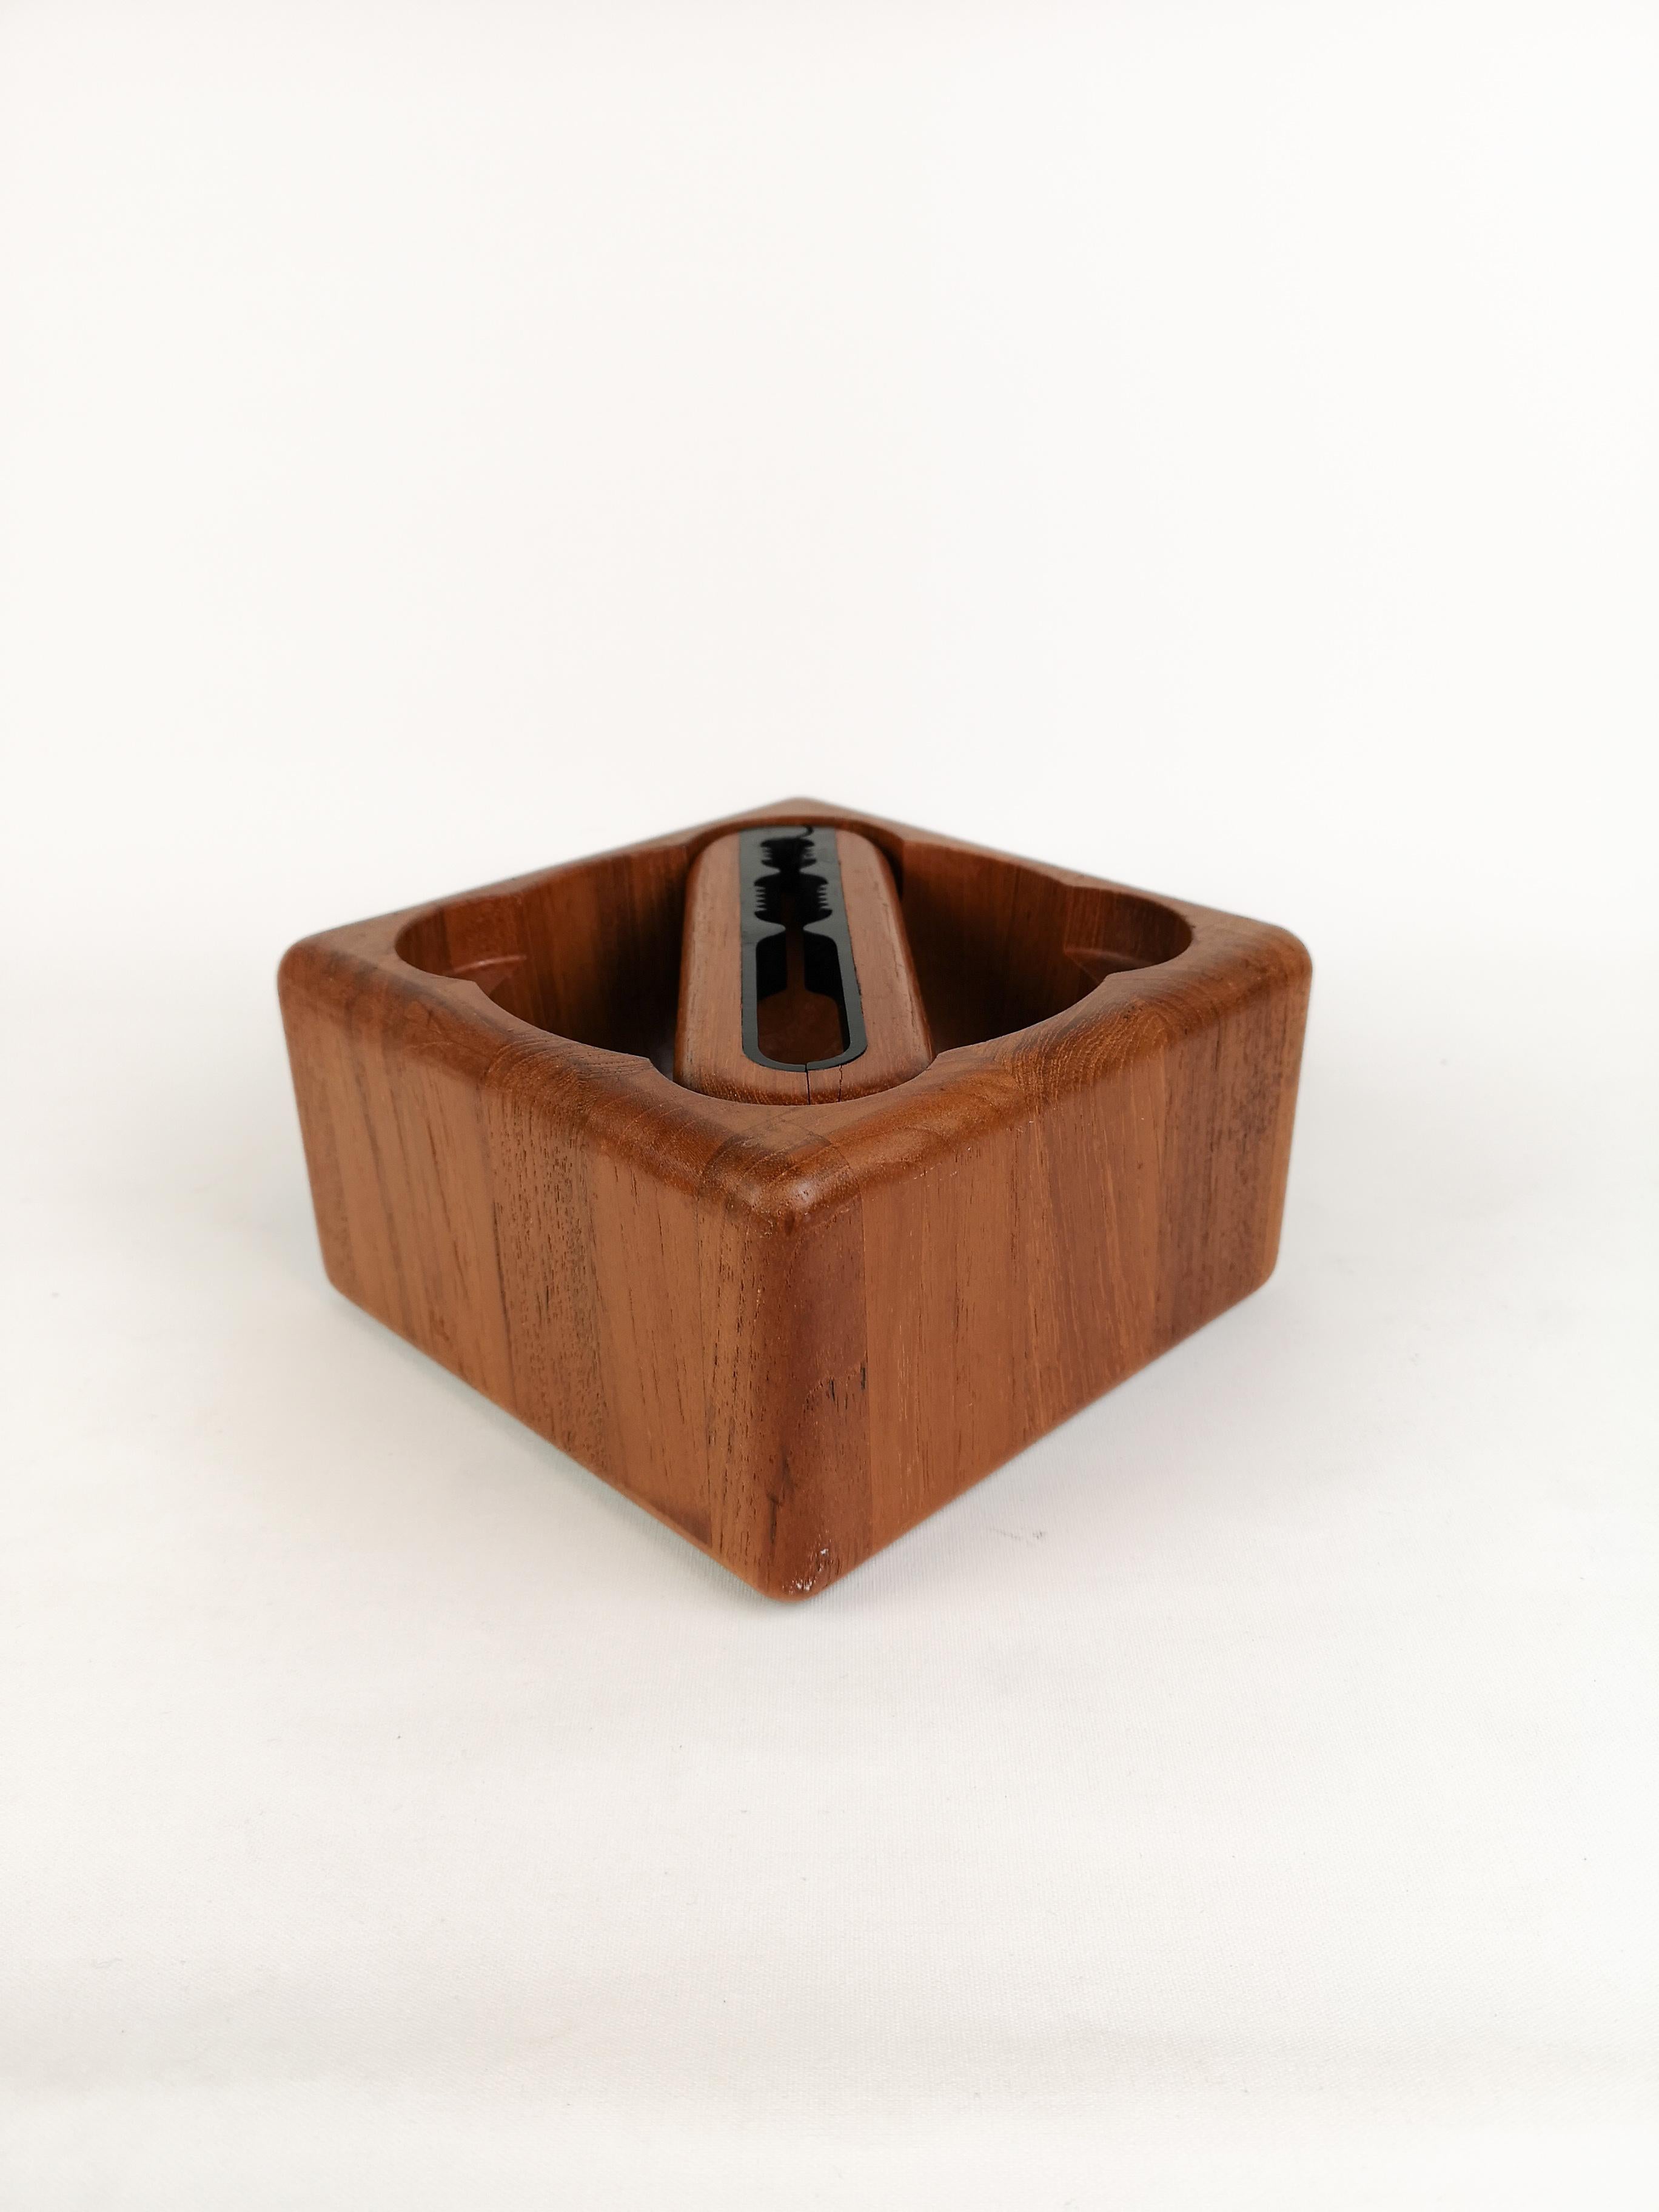 Nice carved bowl in teak with a nicely to the bowl fitted nutcracker. Designed in Denmark for Digsmed.

Good condition

Measures 18 x 18 cm H 10 cm.